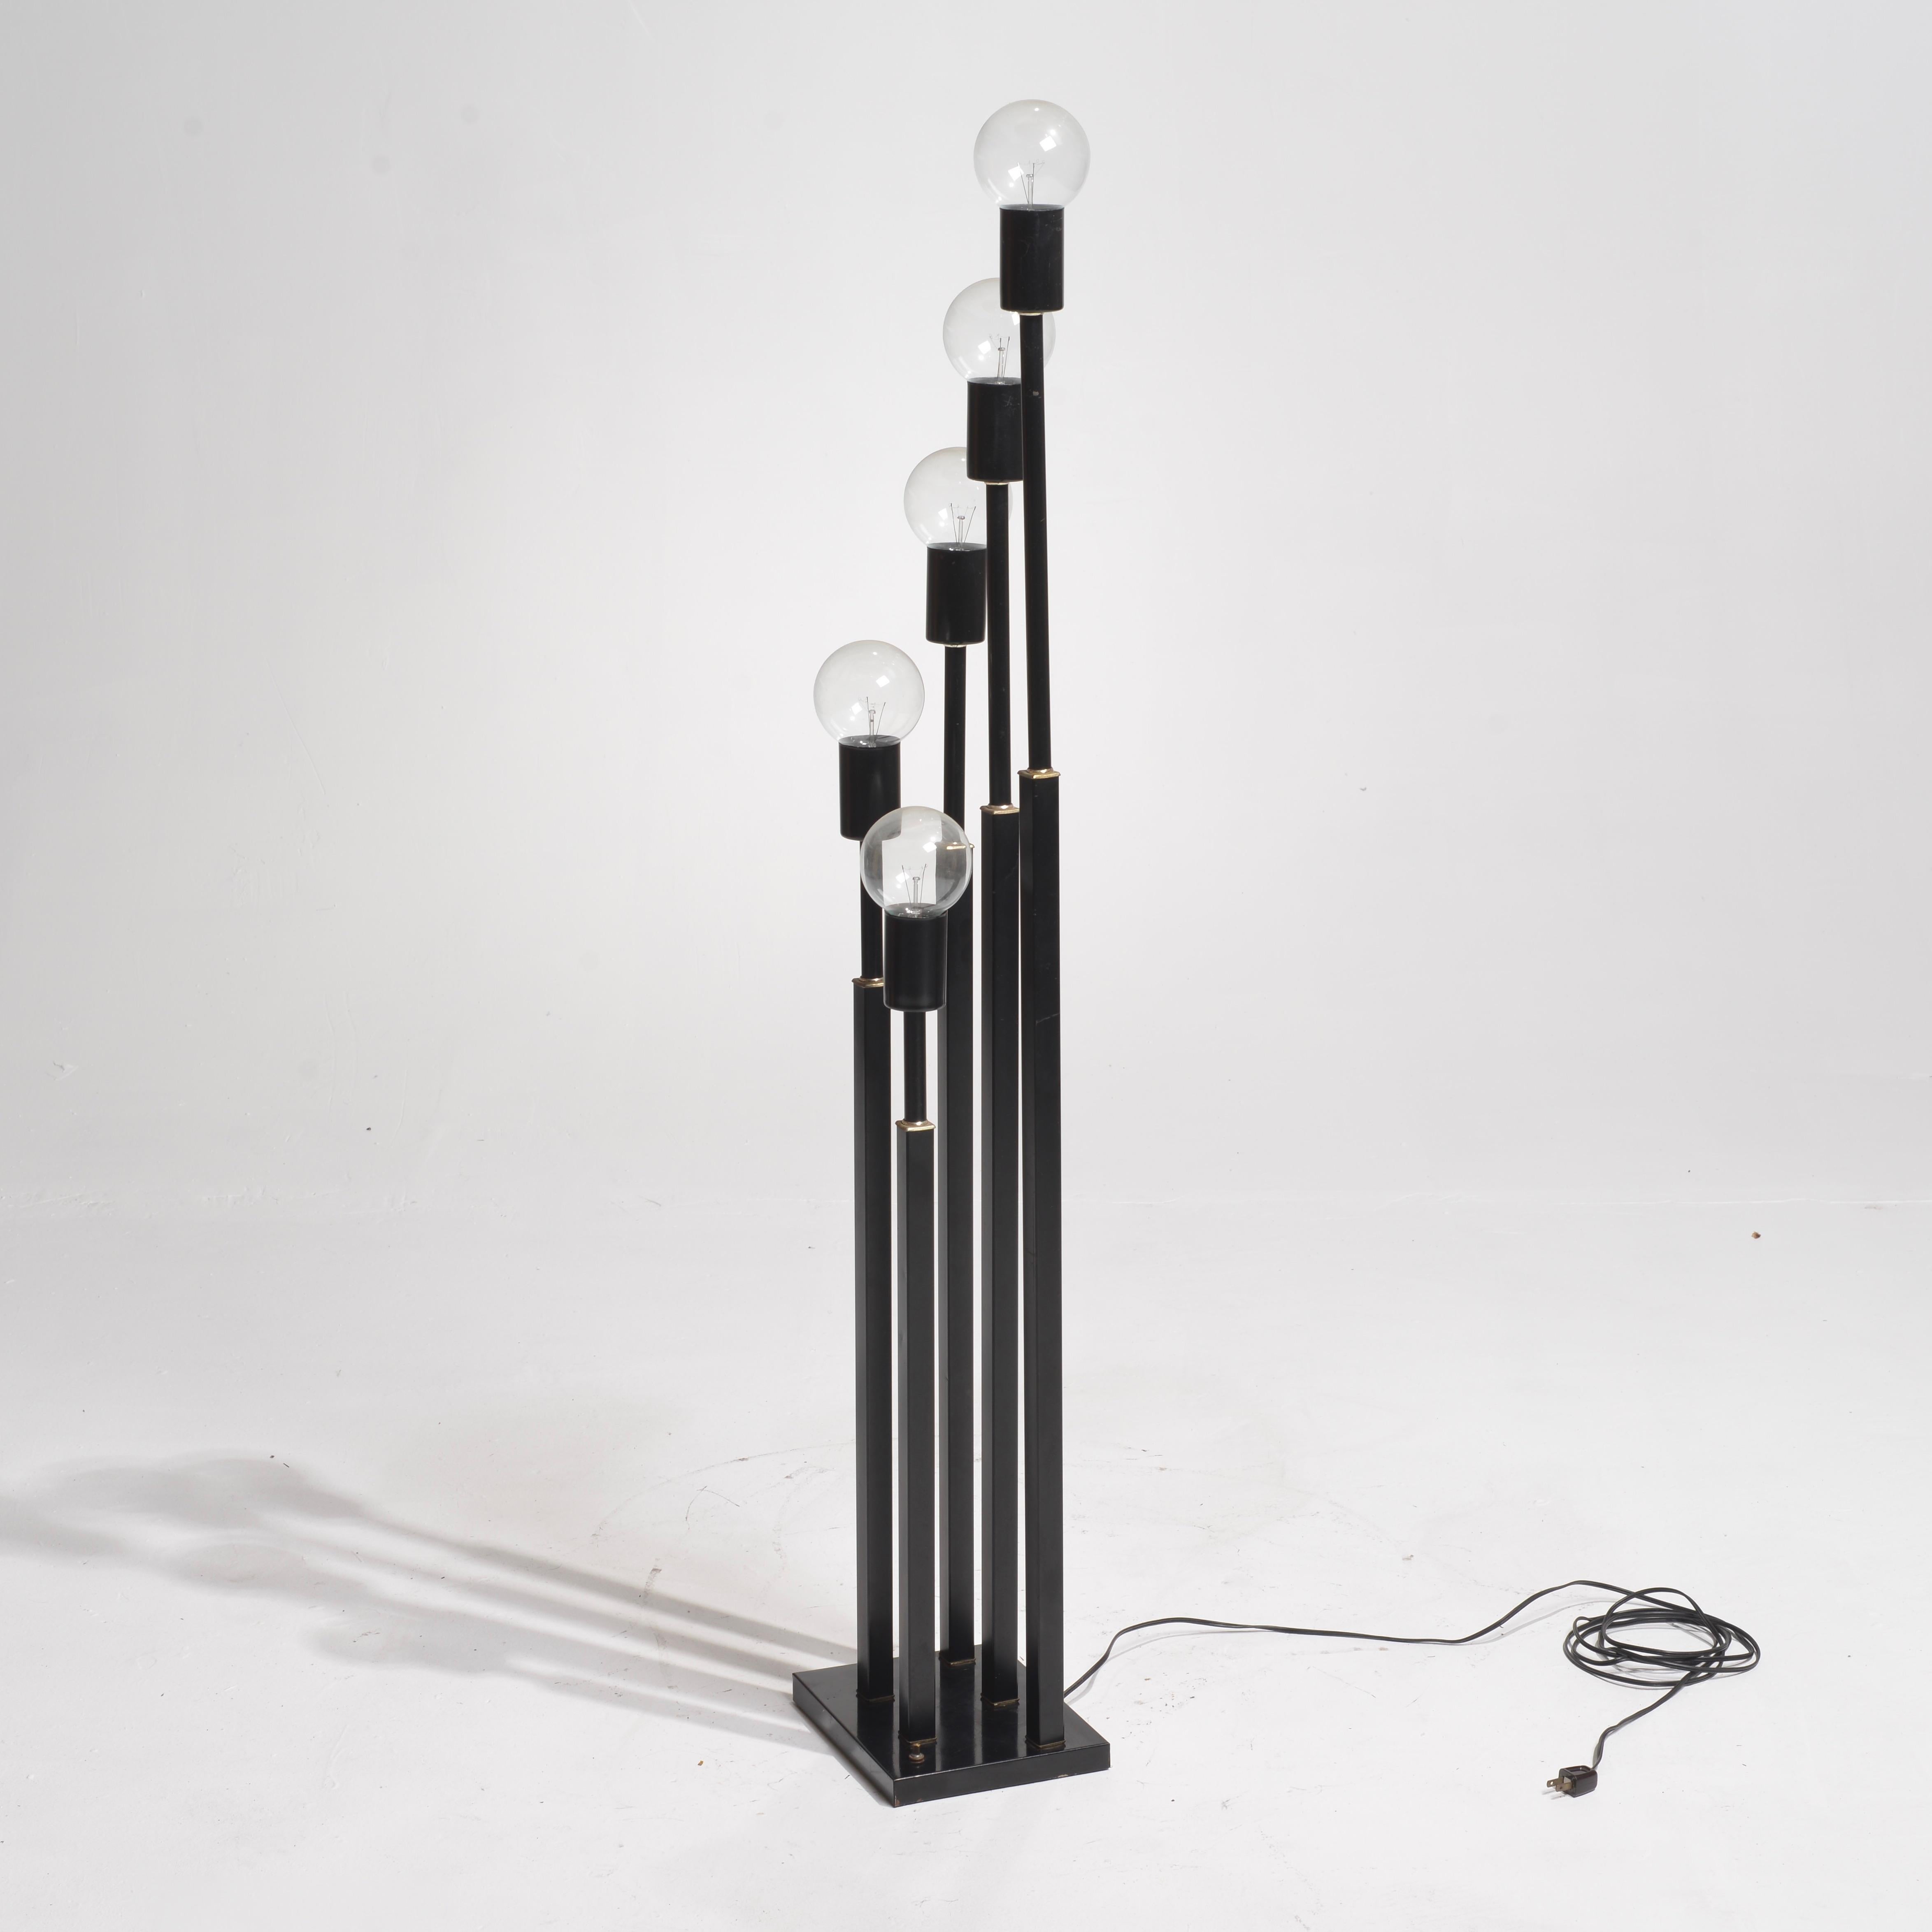 This midcentury French floor lamp features five black painted steel pillars will brass rings on a square base. Each pillar ends with a round clear bulb.